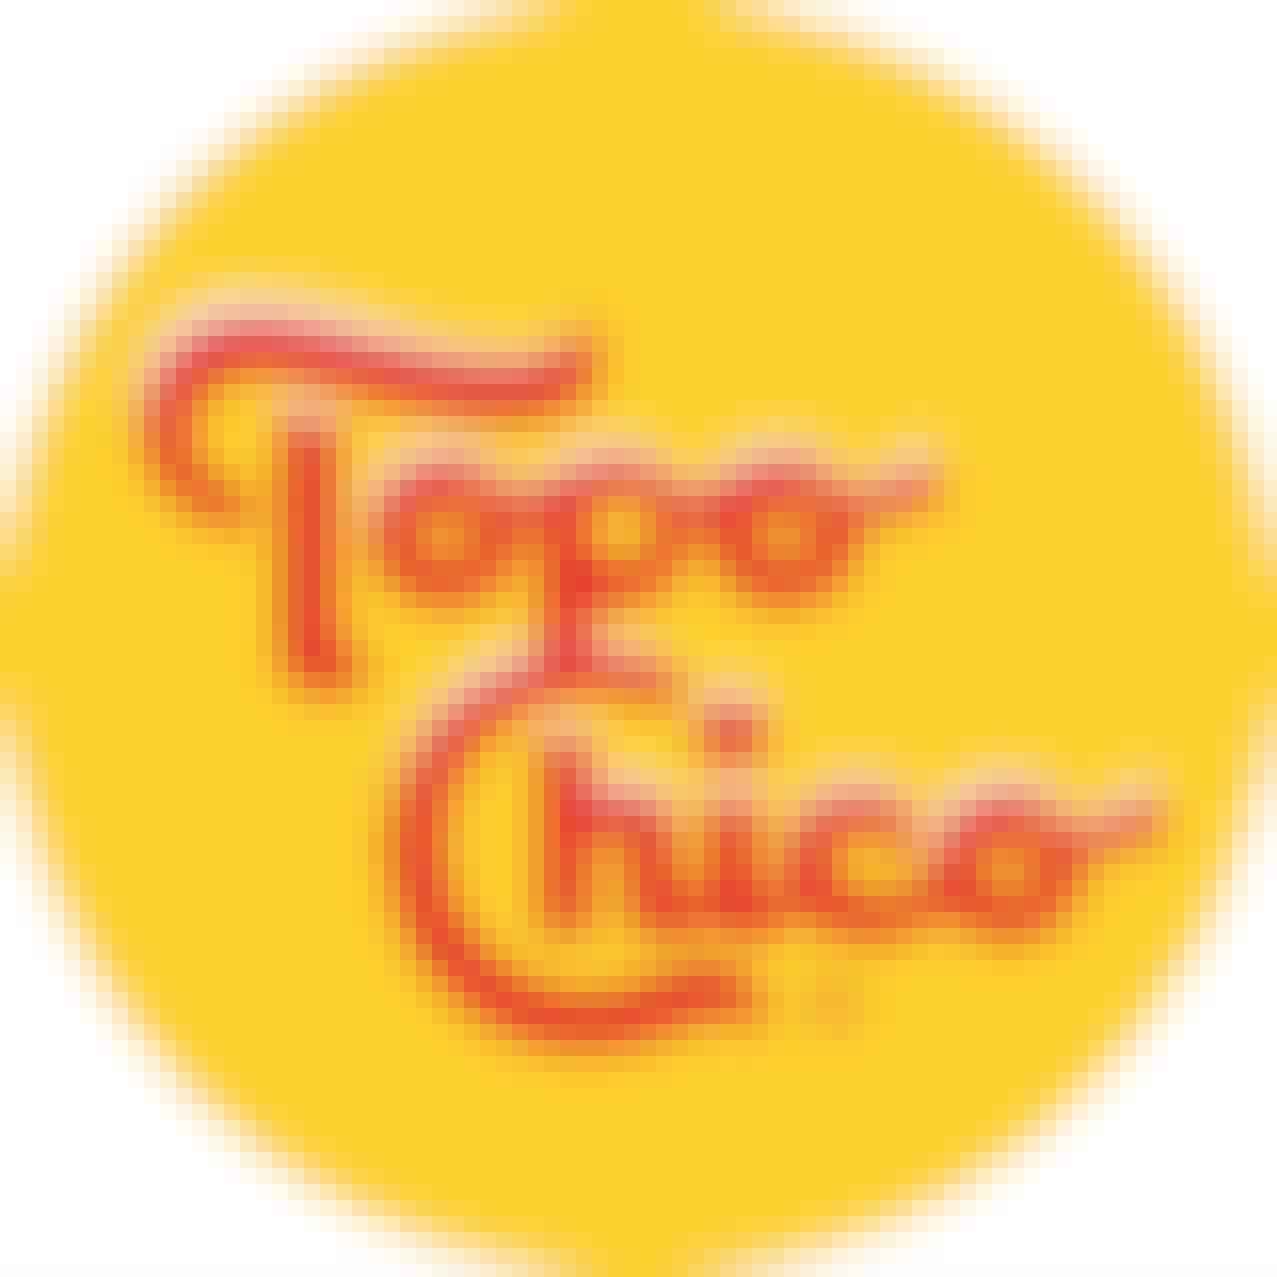 Topo Chico Ranch Water Hard Seltzer